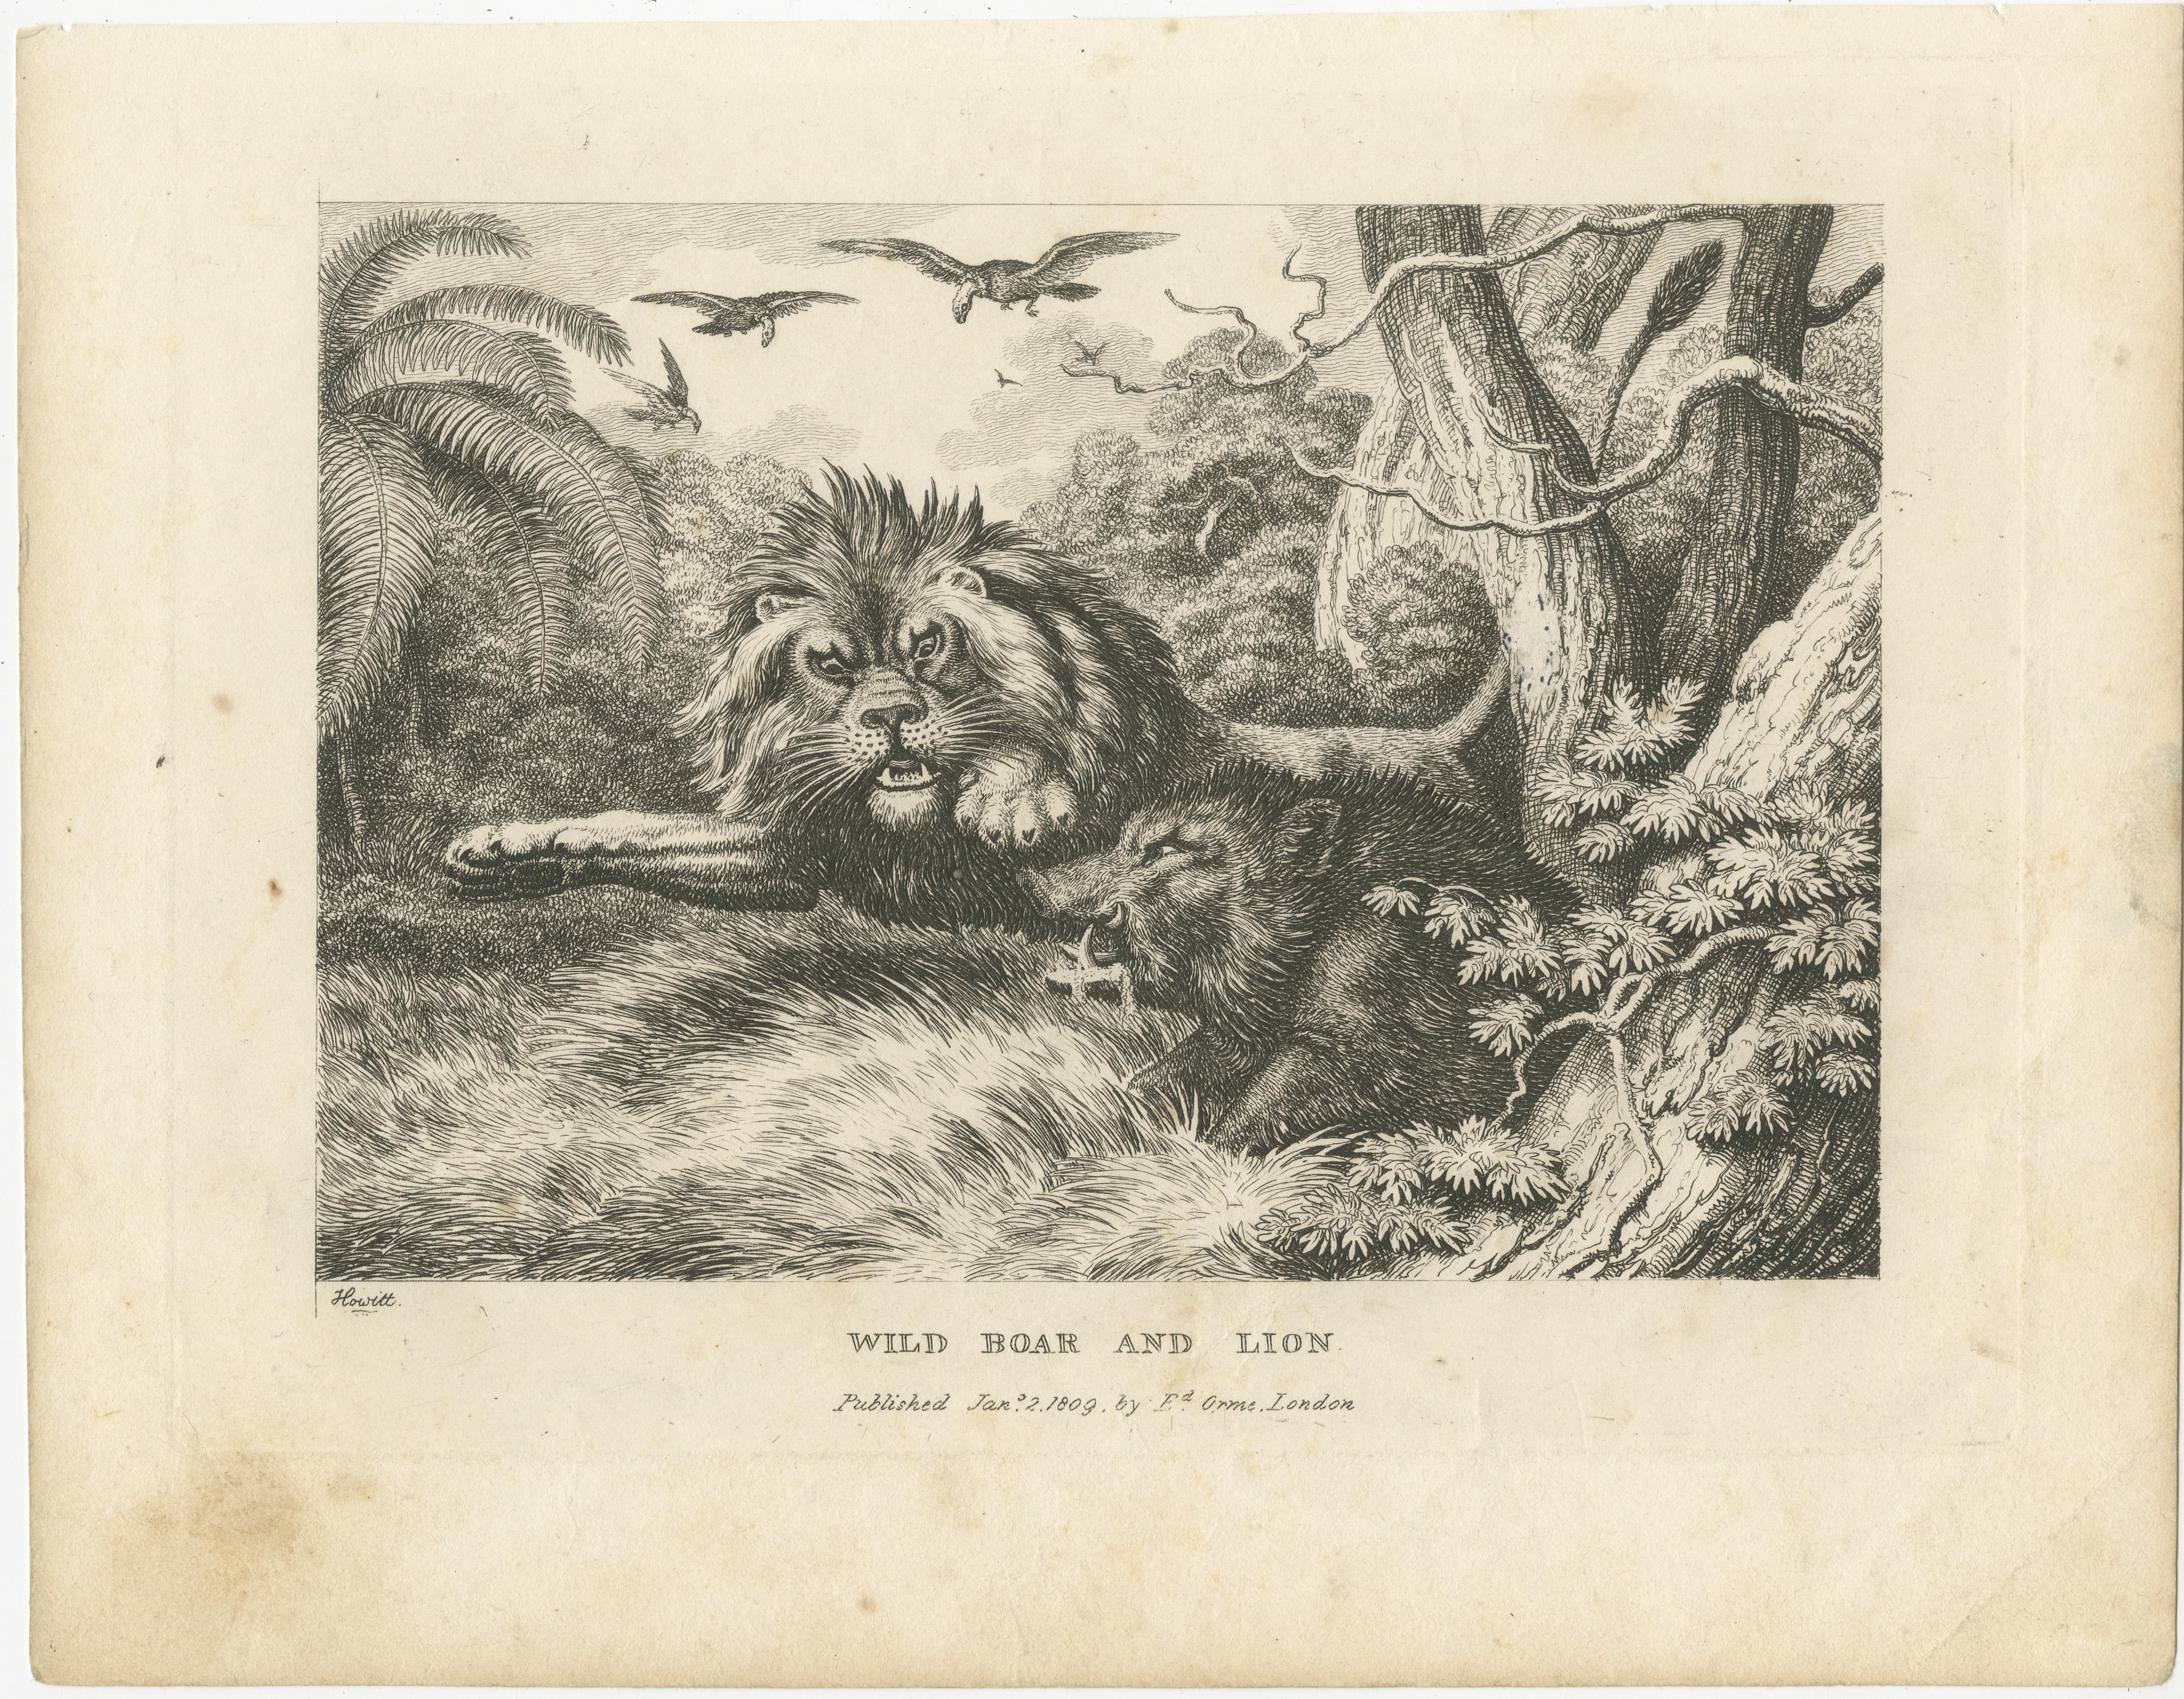 Antique print titled 'Wild Boar and Lion'. Old print of a wild boar and a lion. This print originates from a series depicting fables by Samuel Howitt. Samuel Howitt was an English painter, illustrator and etcher of animals, hunting, horse-racing and